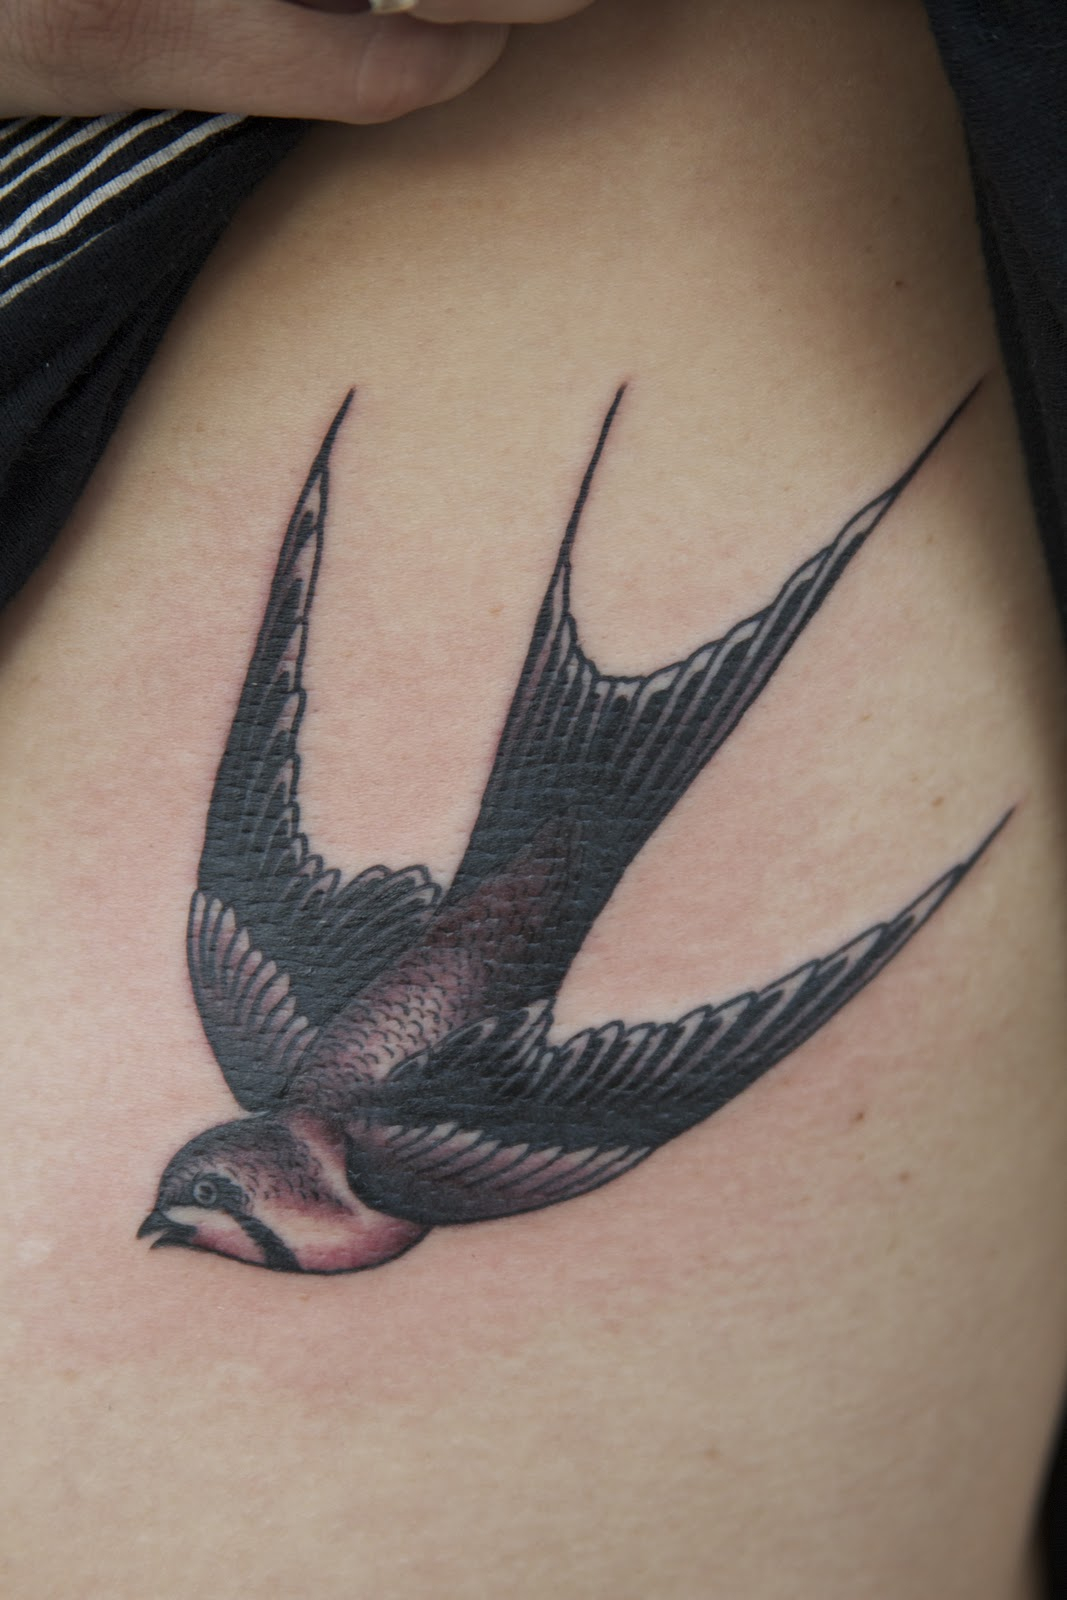 Swallow Tattoos Designs Ideas And Meaning Tattoos For You regarding dimensions 1067 X 1600